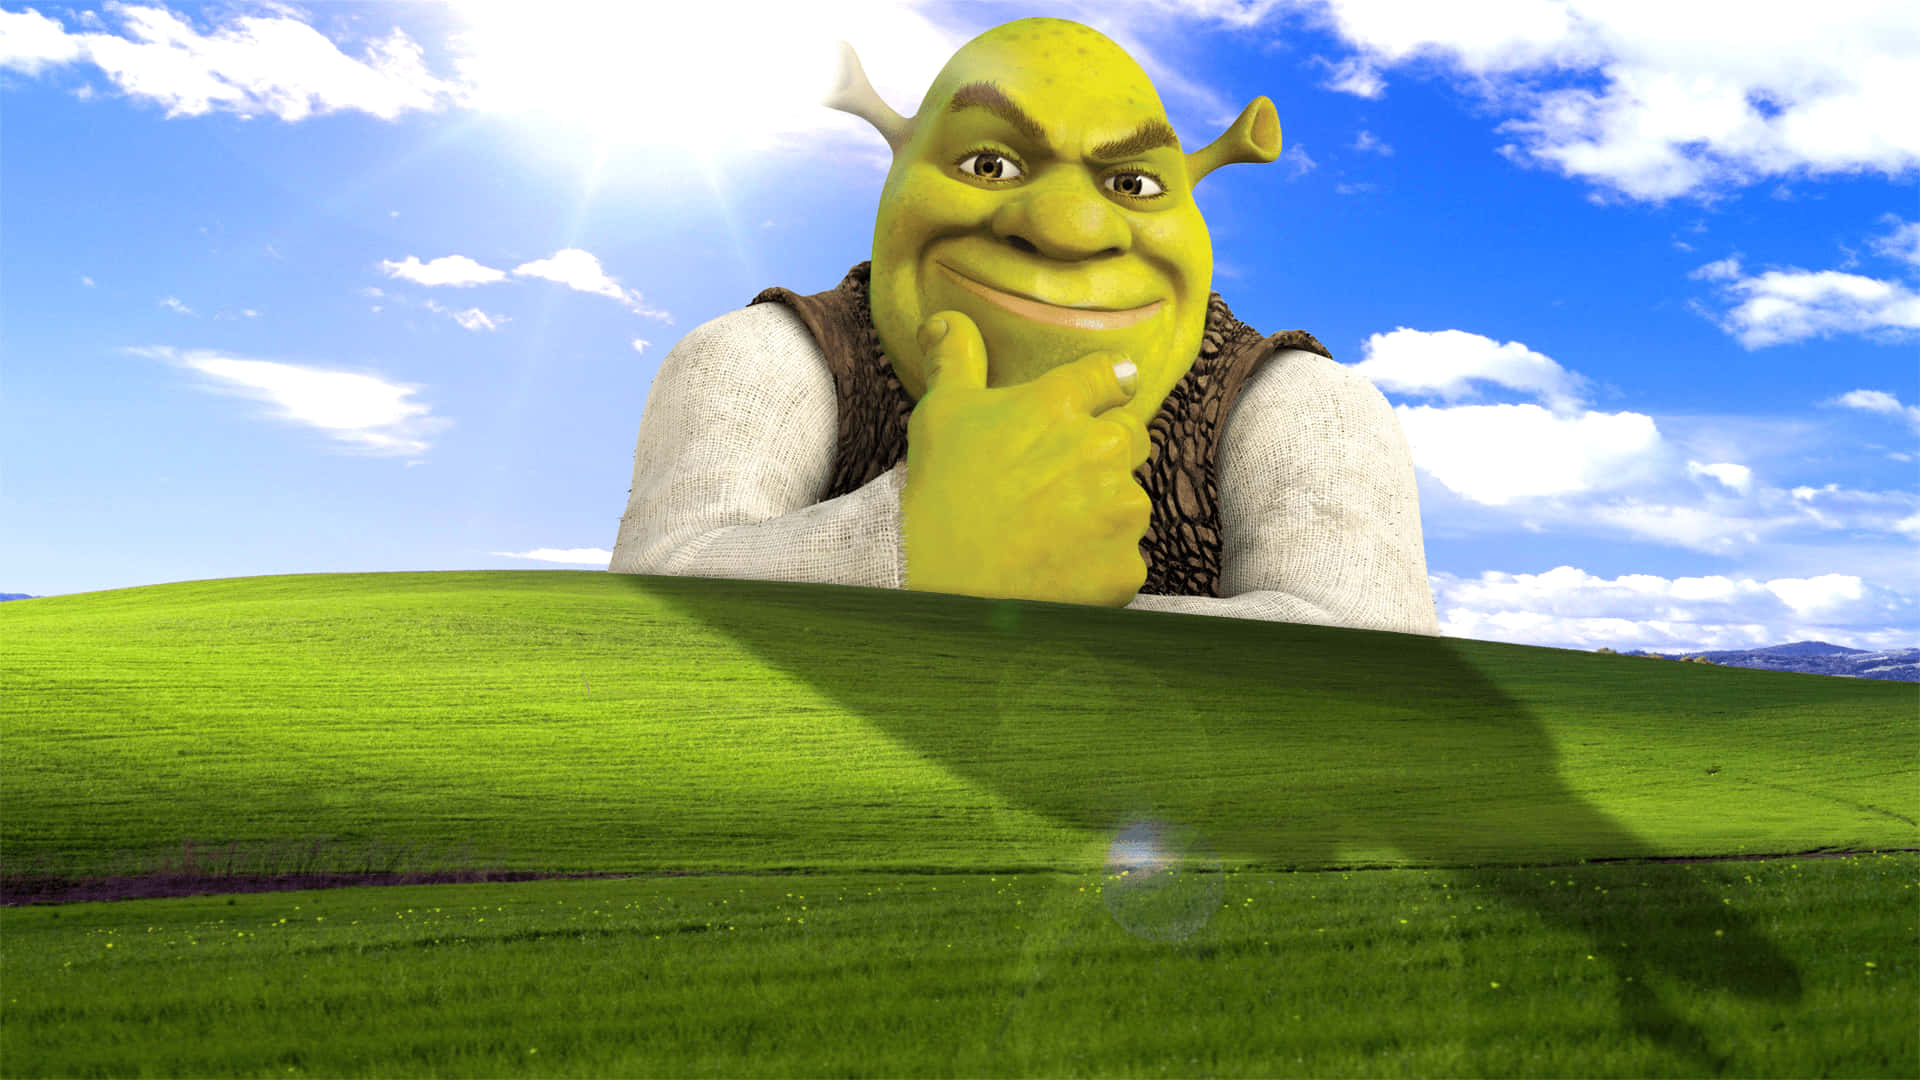 Get ready to laugh with Shrek and his friends in this hilarious animated comedy.